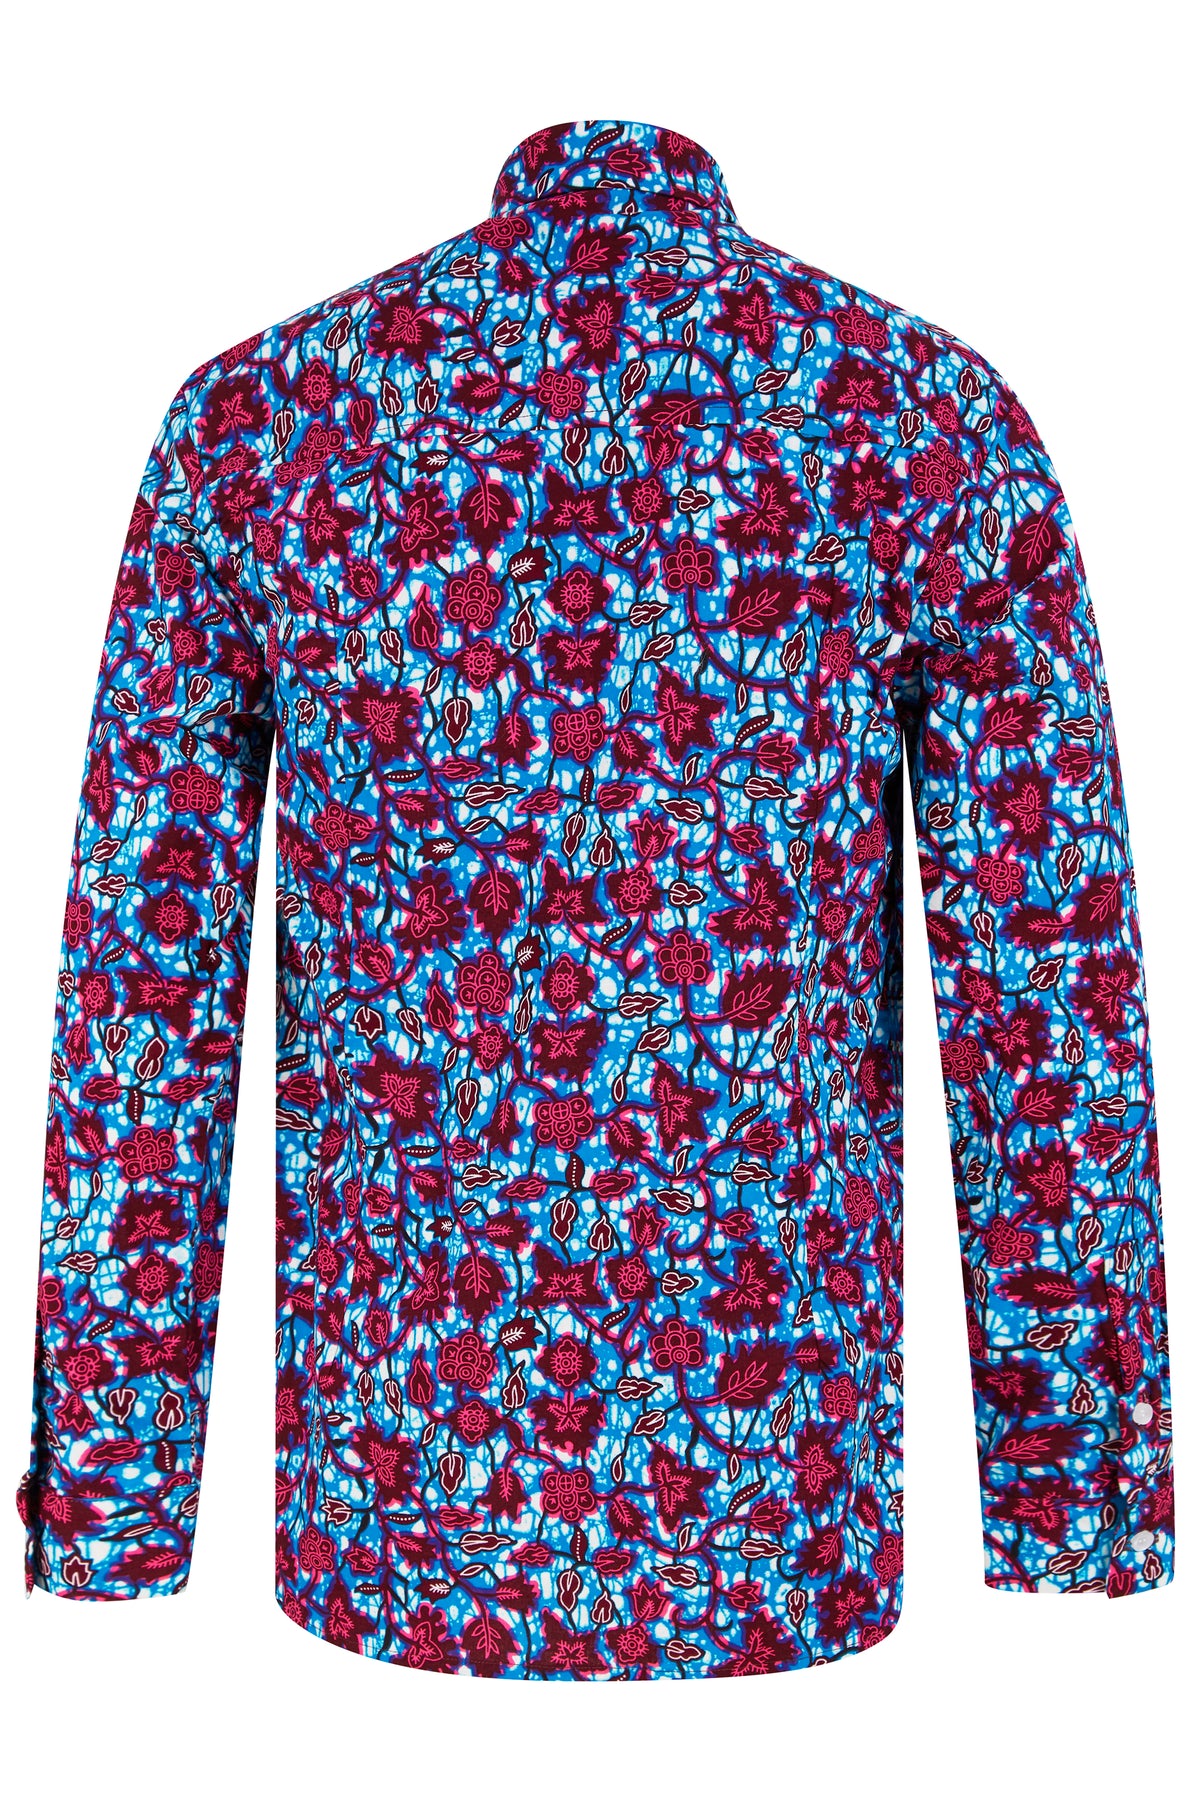 Men's African Print Shirt- Blue Florals - OHEMA OHENE AFRICAN INSPIRED FASHION